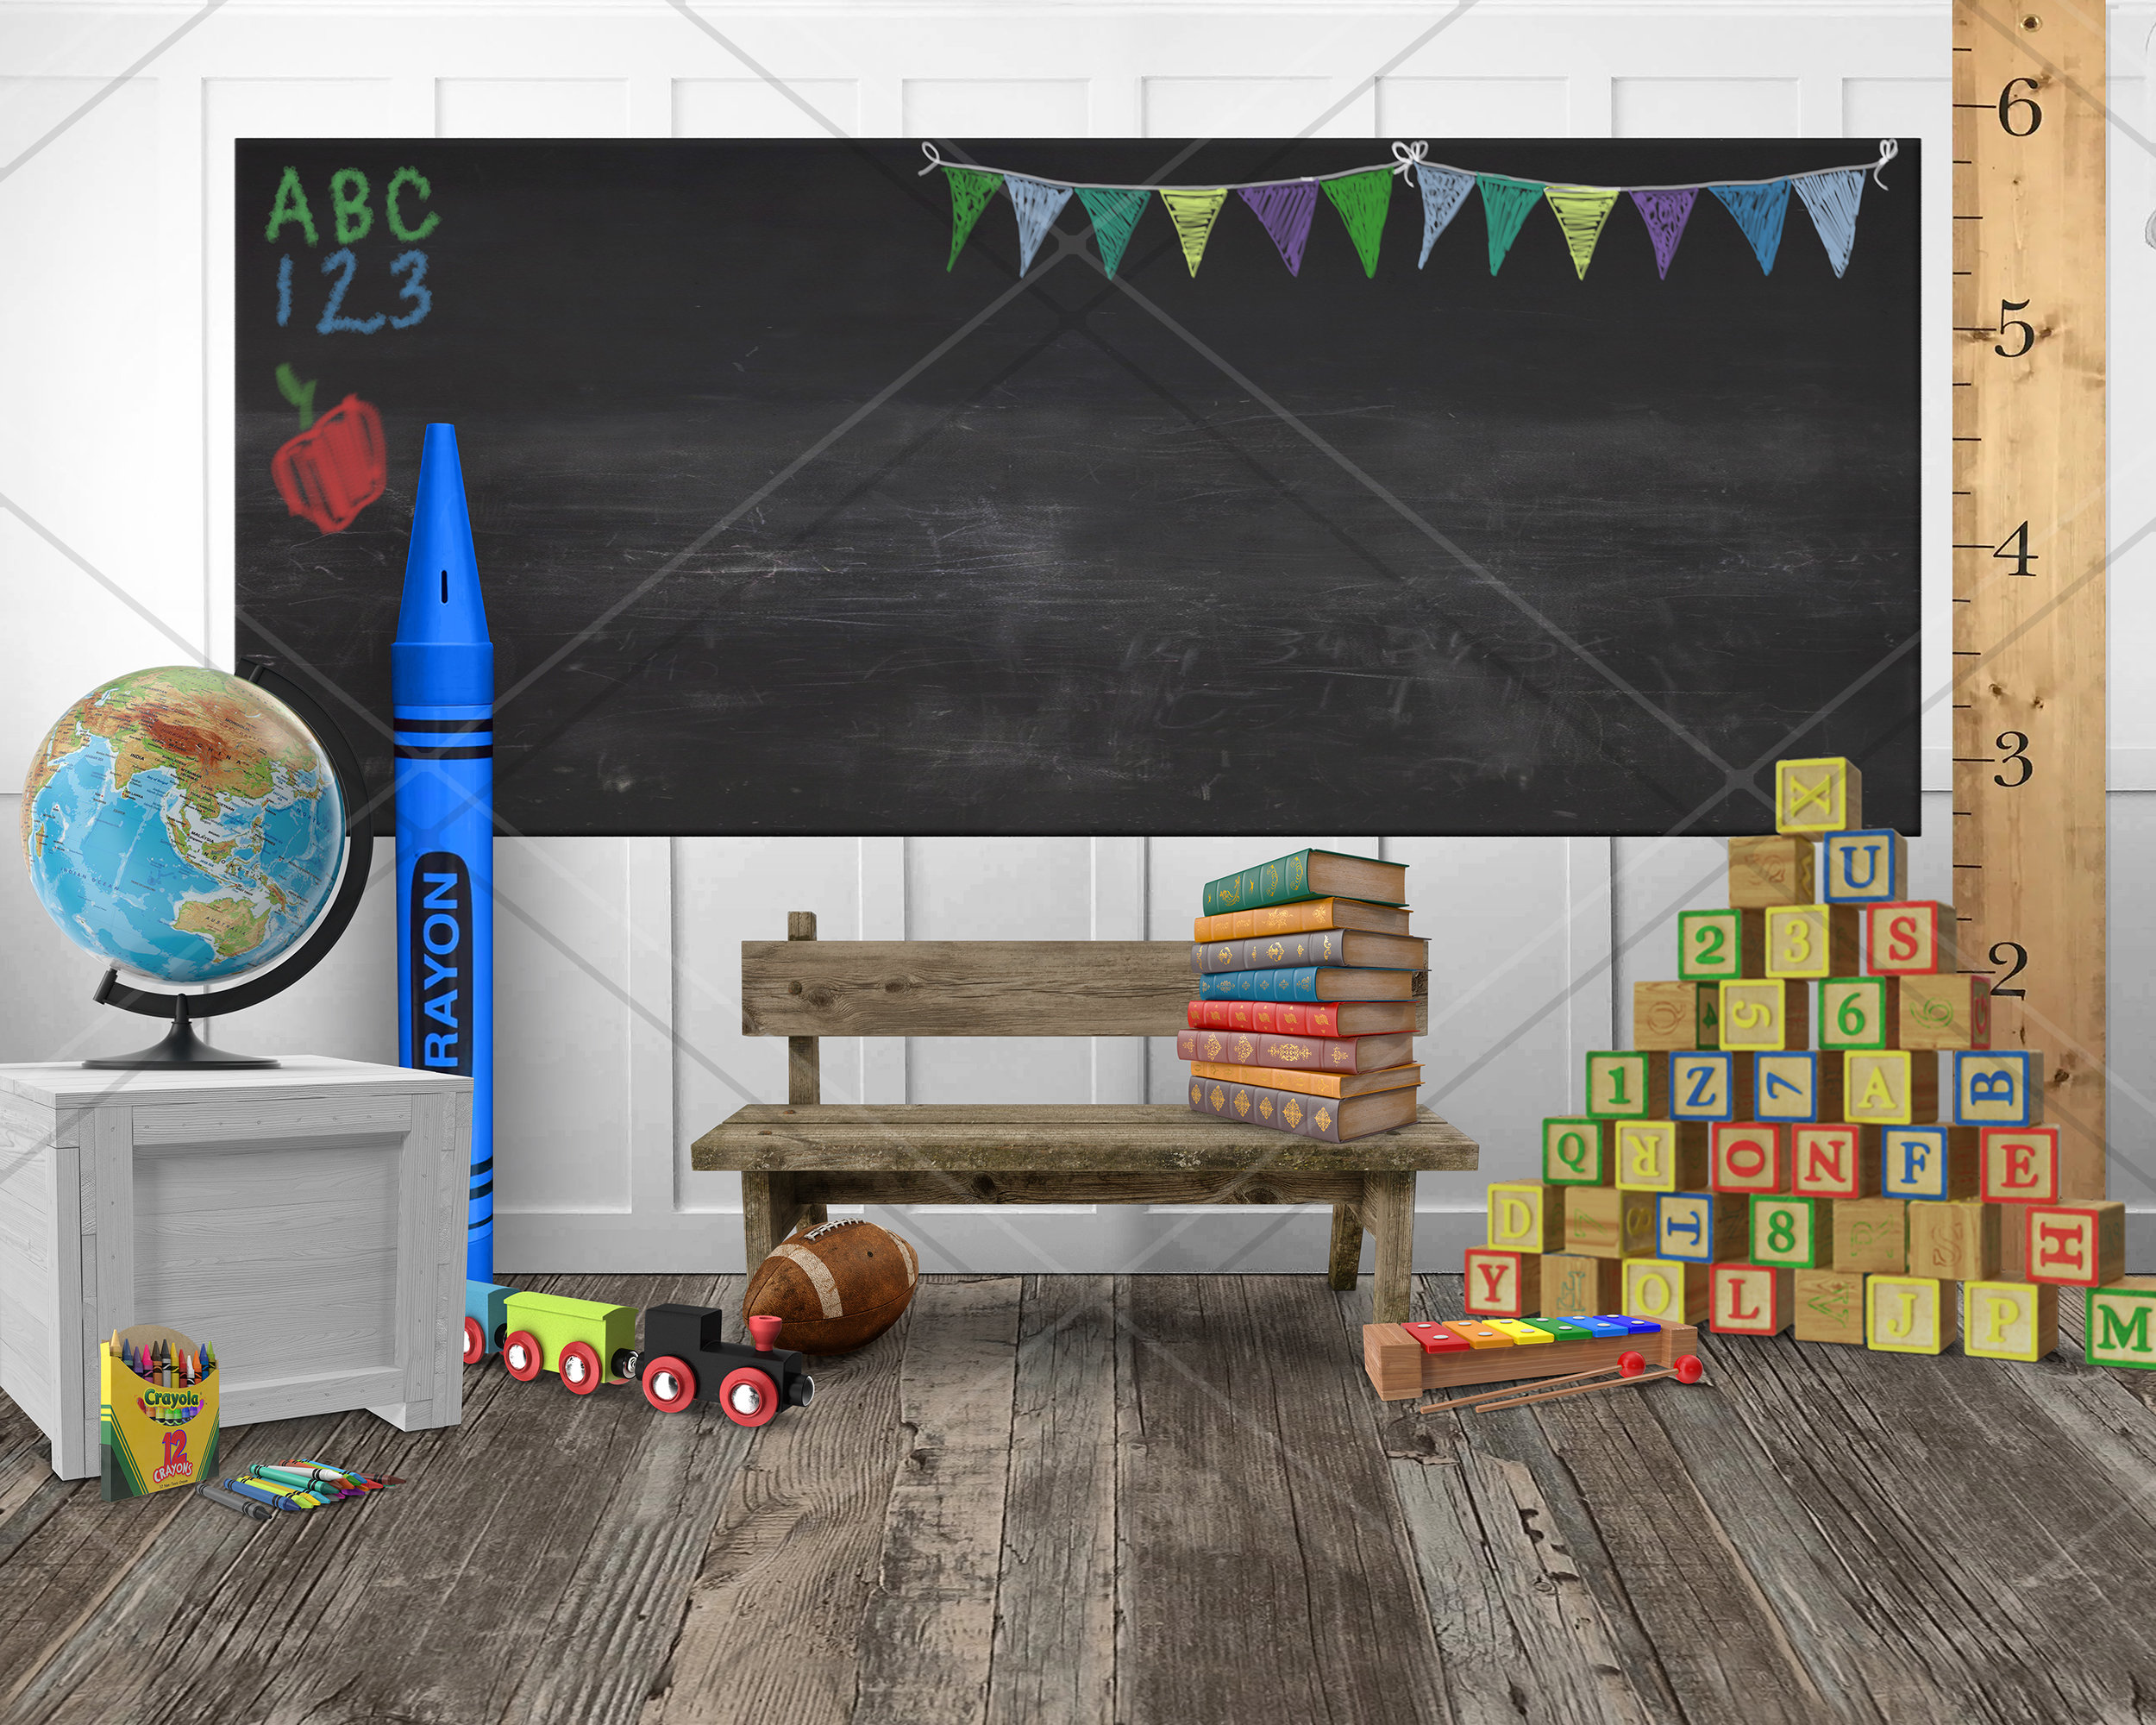 Photoshop Layer Style Set - Colored Chalkboard – AsheDesign